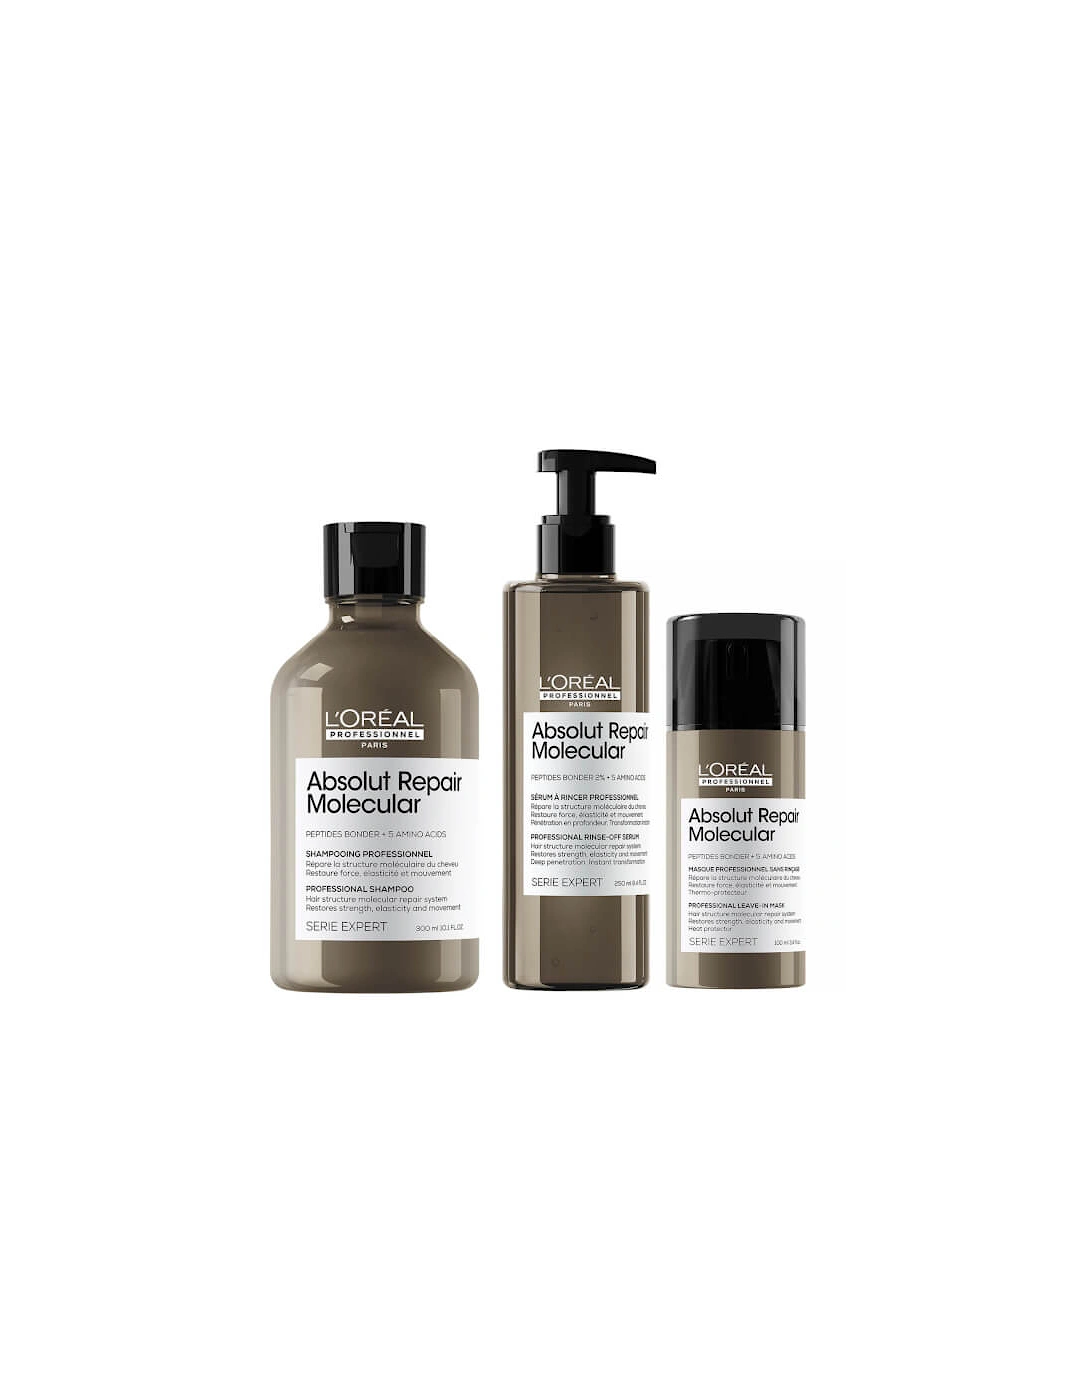 Professionnel Serie Expert Absolut Repair Molecular Shampoo, Rinse-off Serum and Mask Routine for Damaged Hair, 2 of 1